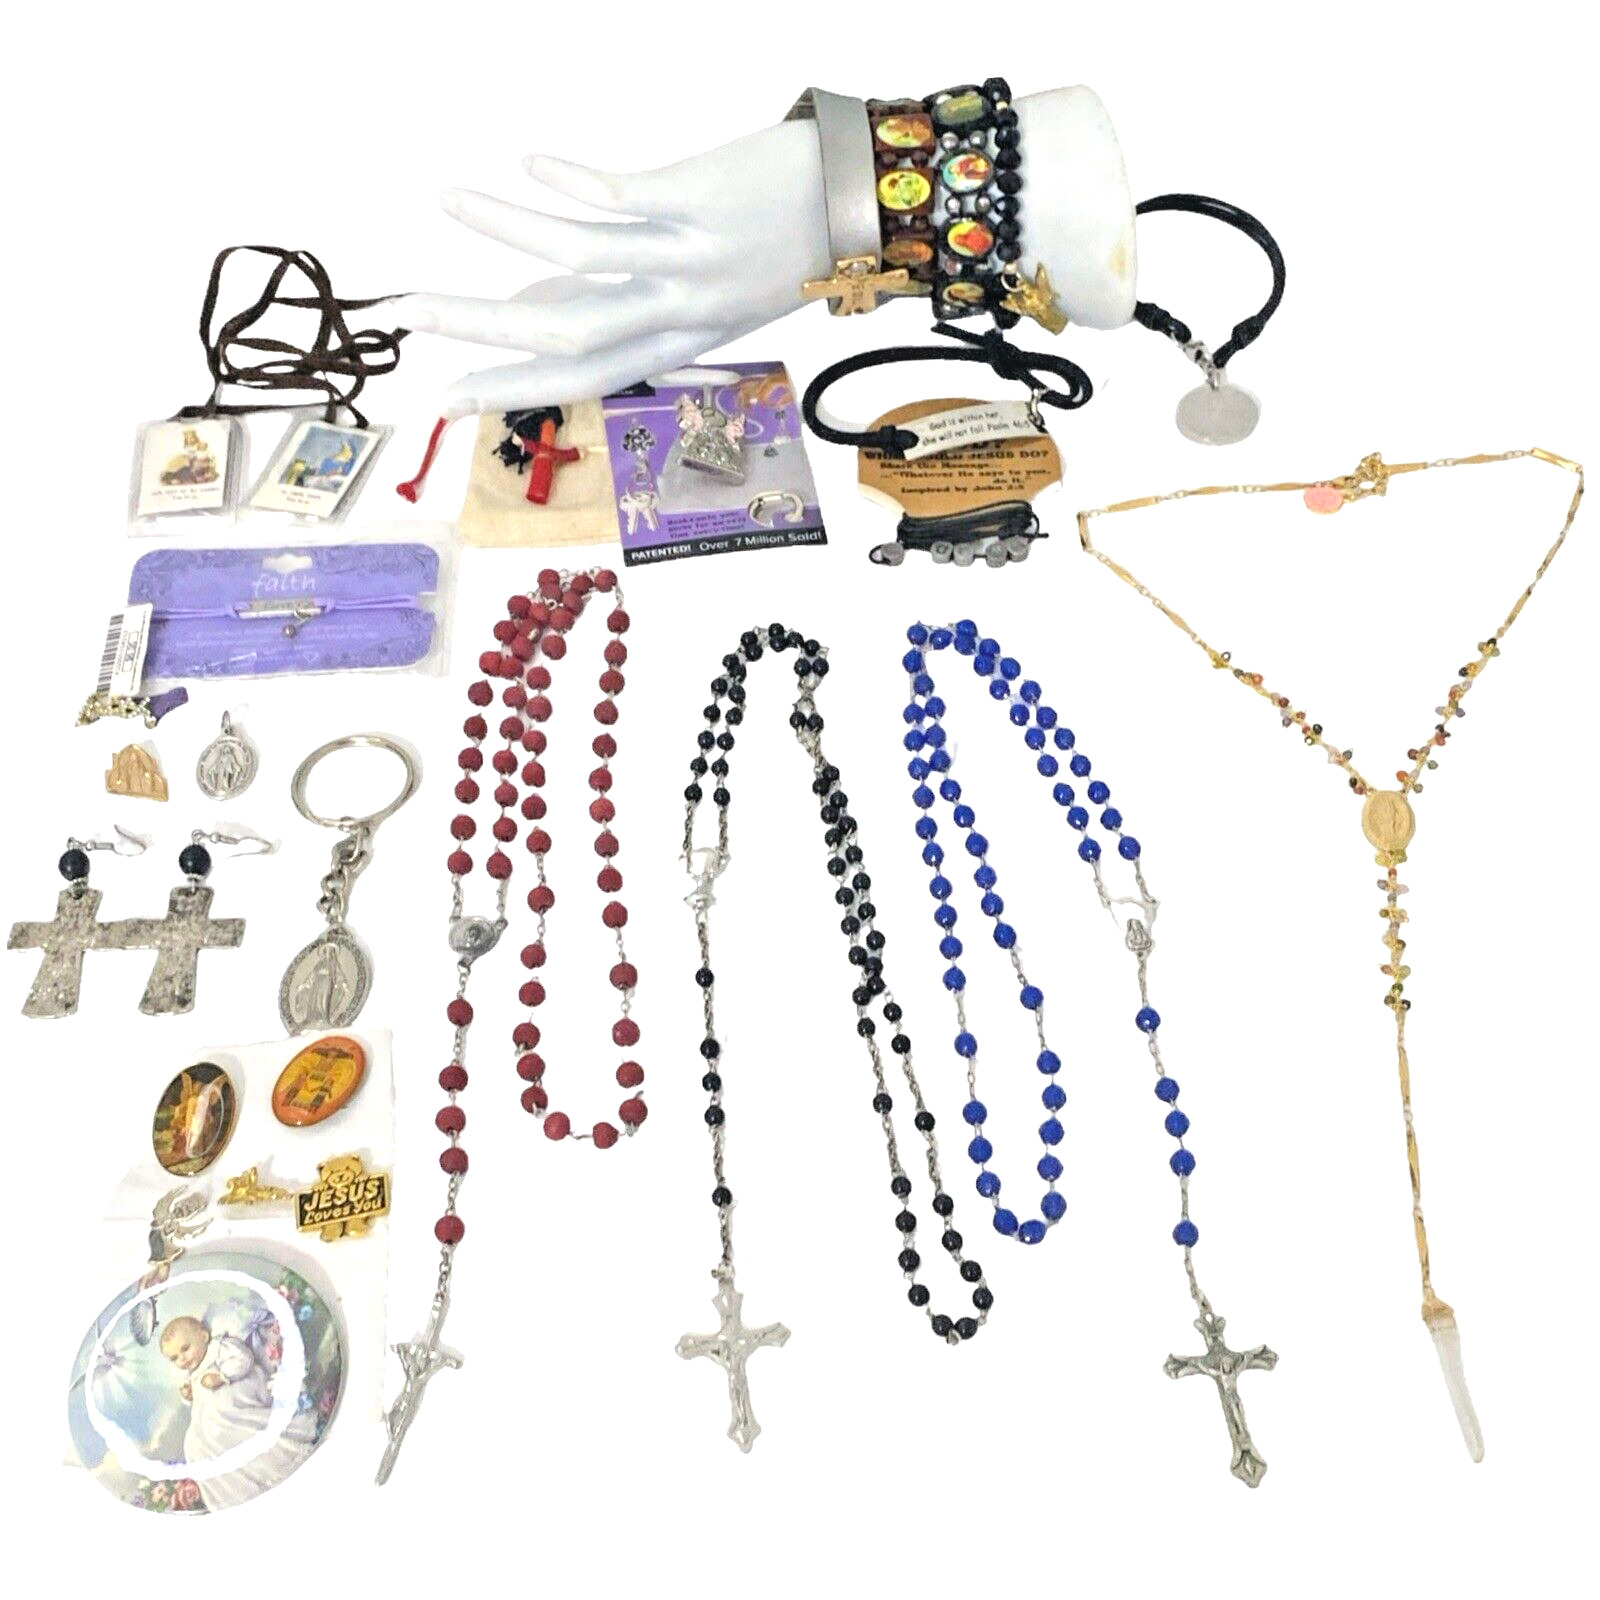 Vintage Religious Catholic Rosary Necklace Pins Jewelry lot